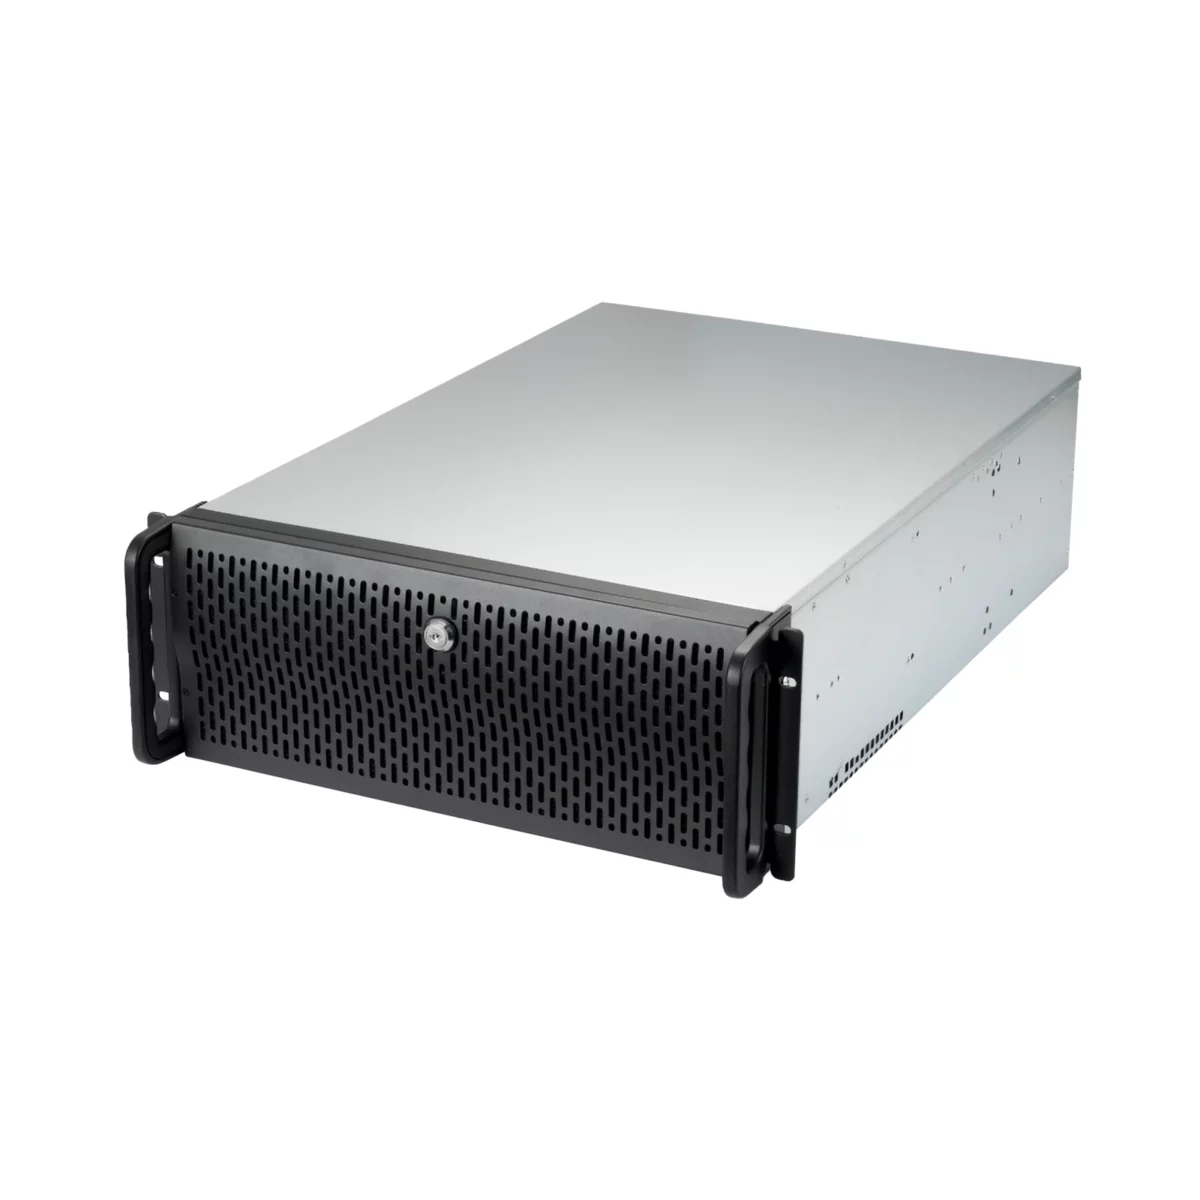 rackmount chassis OC4650-y side view